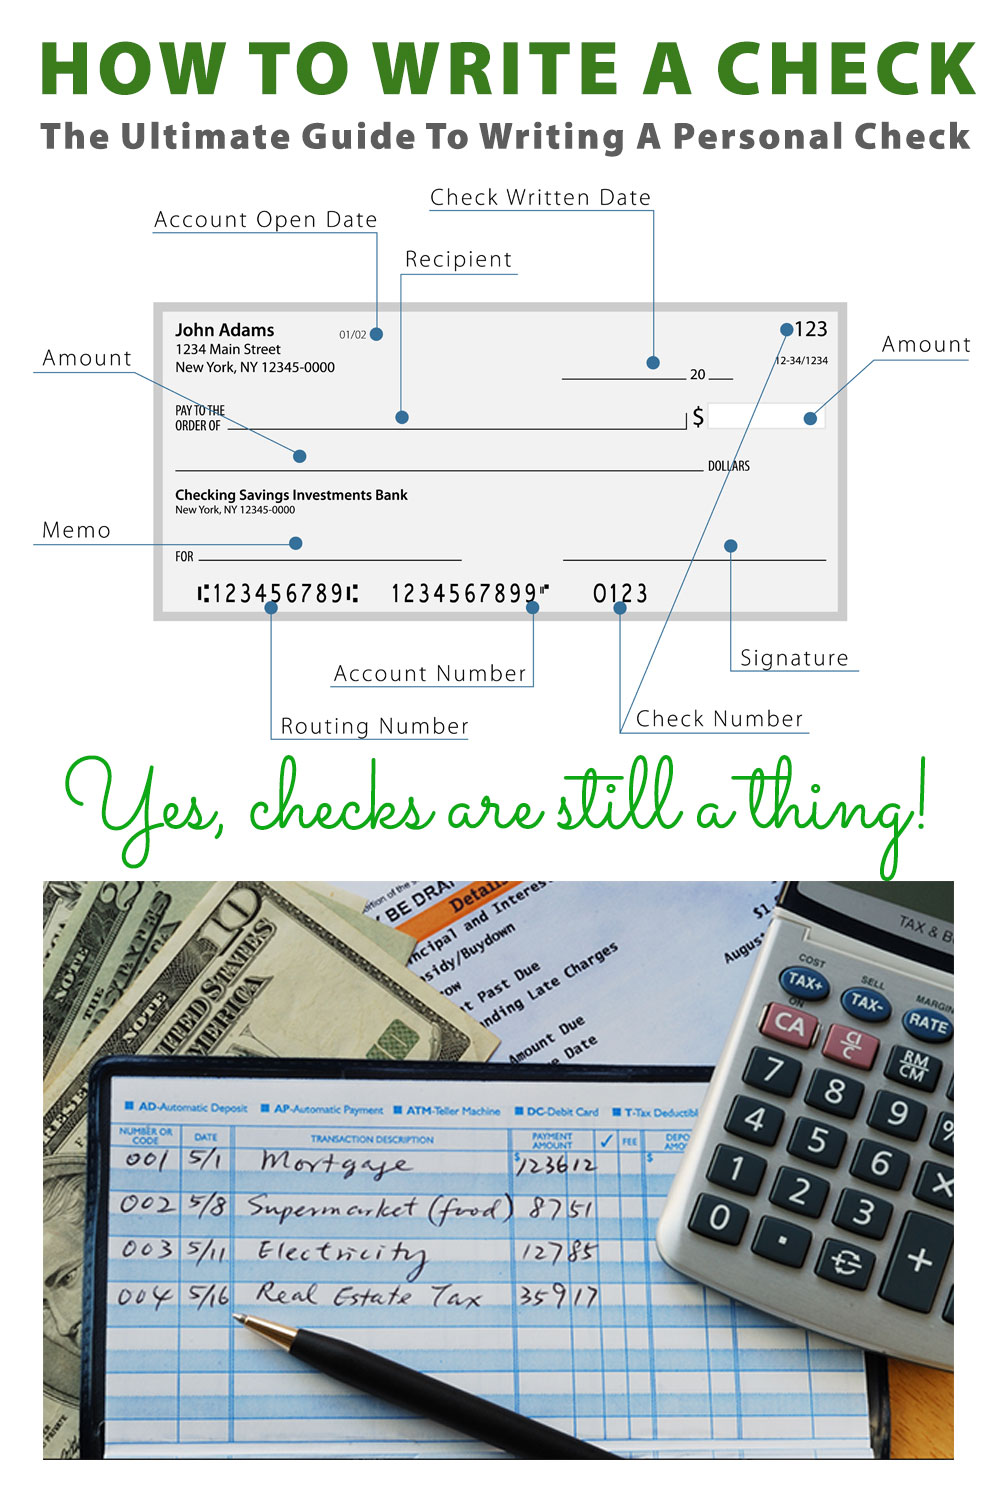 How To Write A Check: The Ultimate Guide To Writing A Check